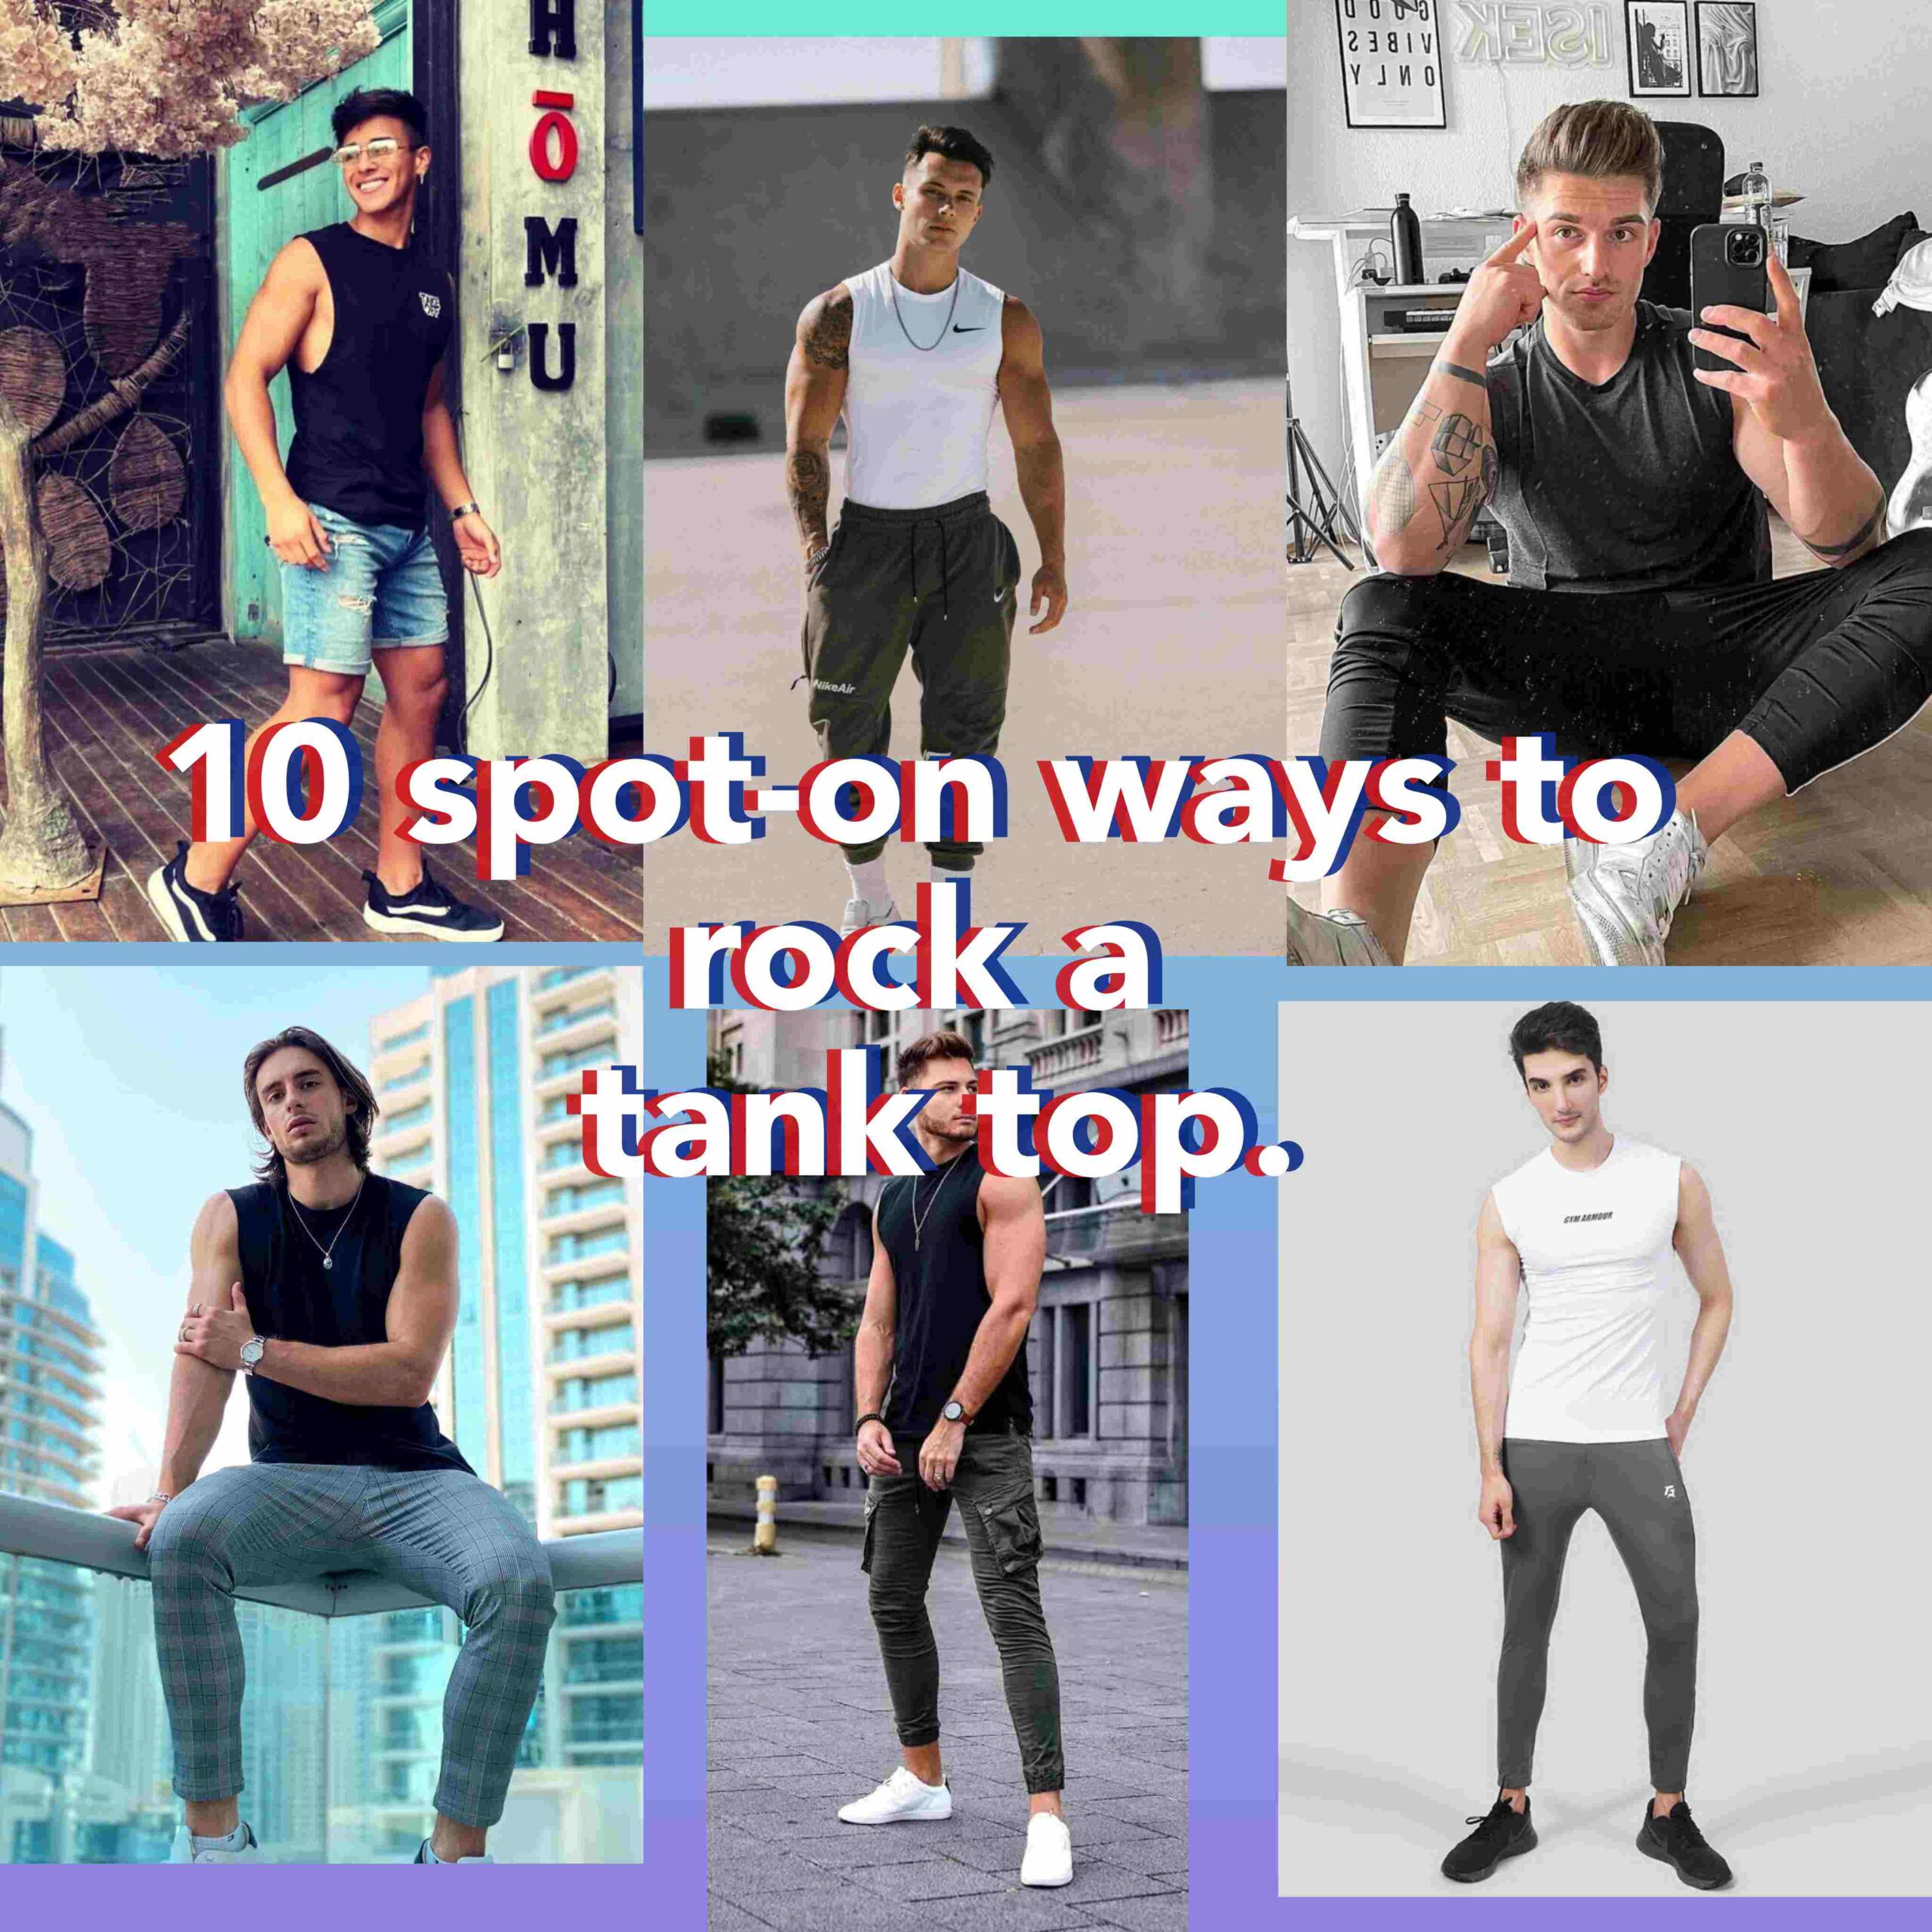 10 spot-on ways for men to rock a tank top